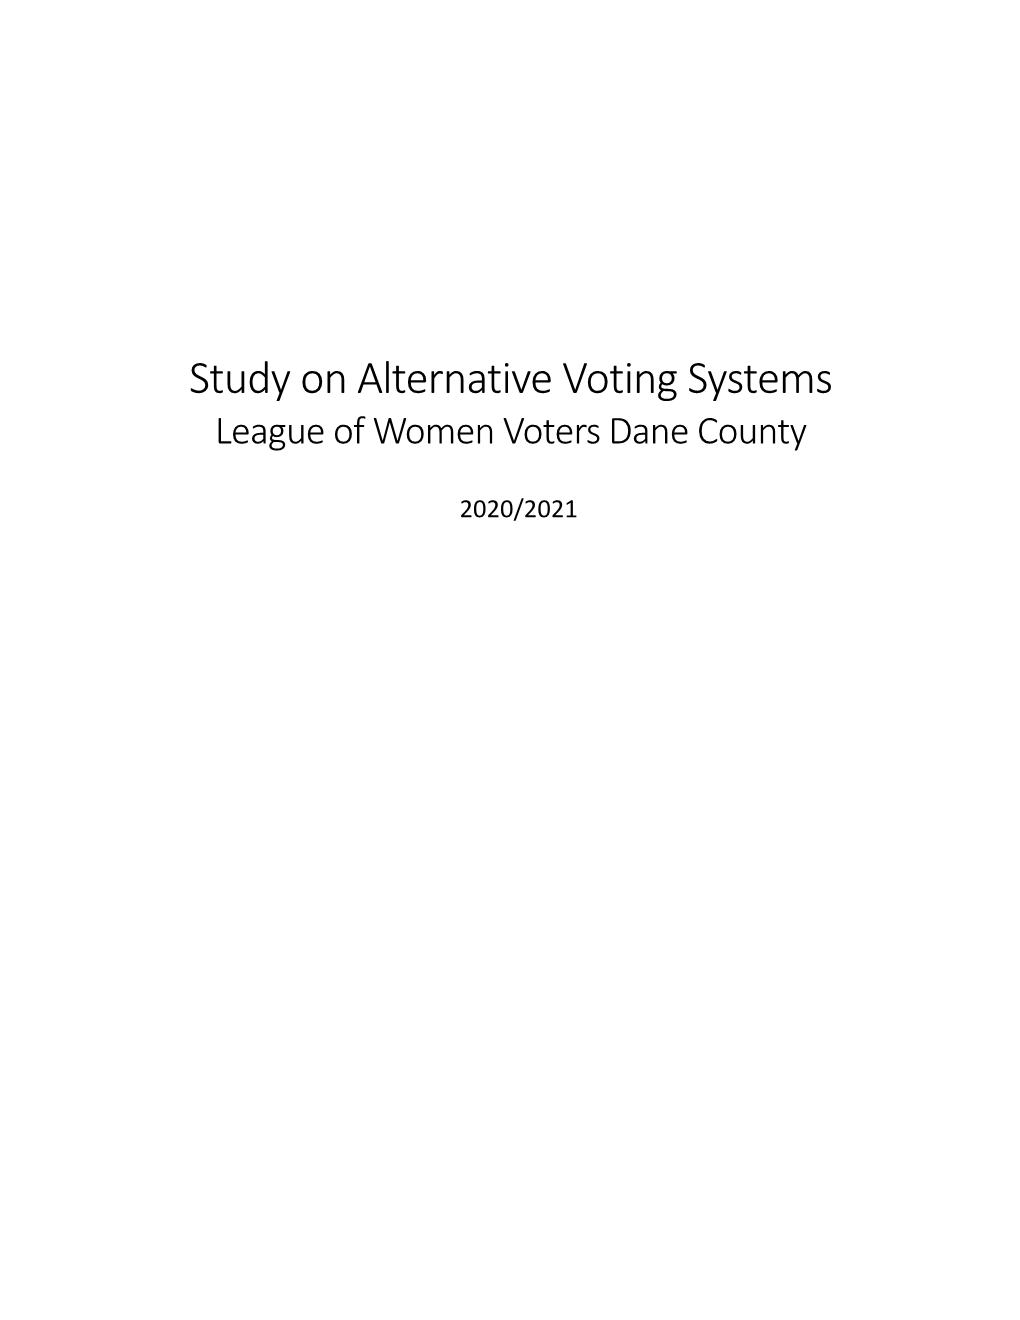 Study on Alternative Voting Systems League of Women Voters Dane County